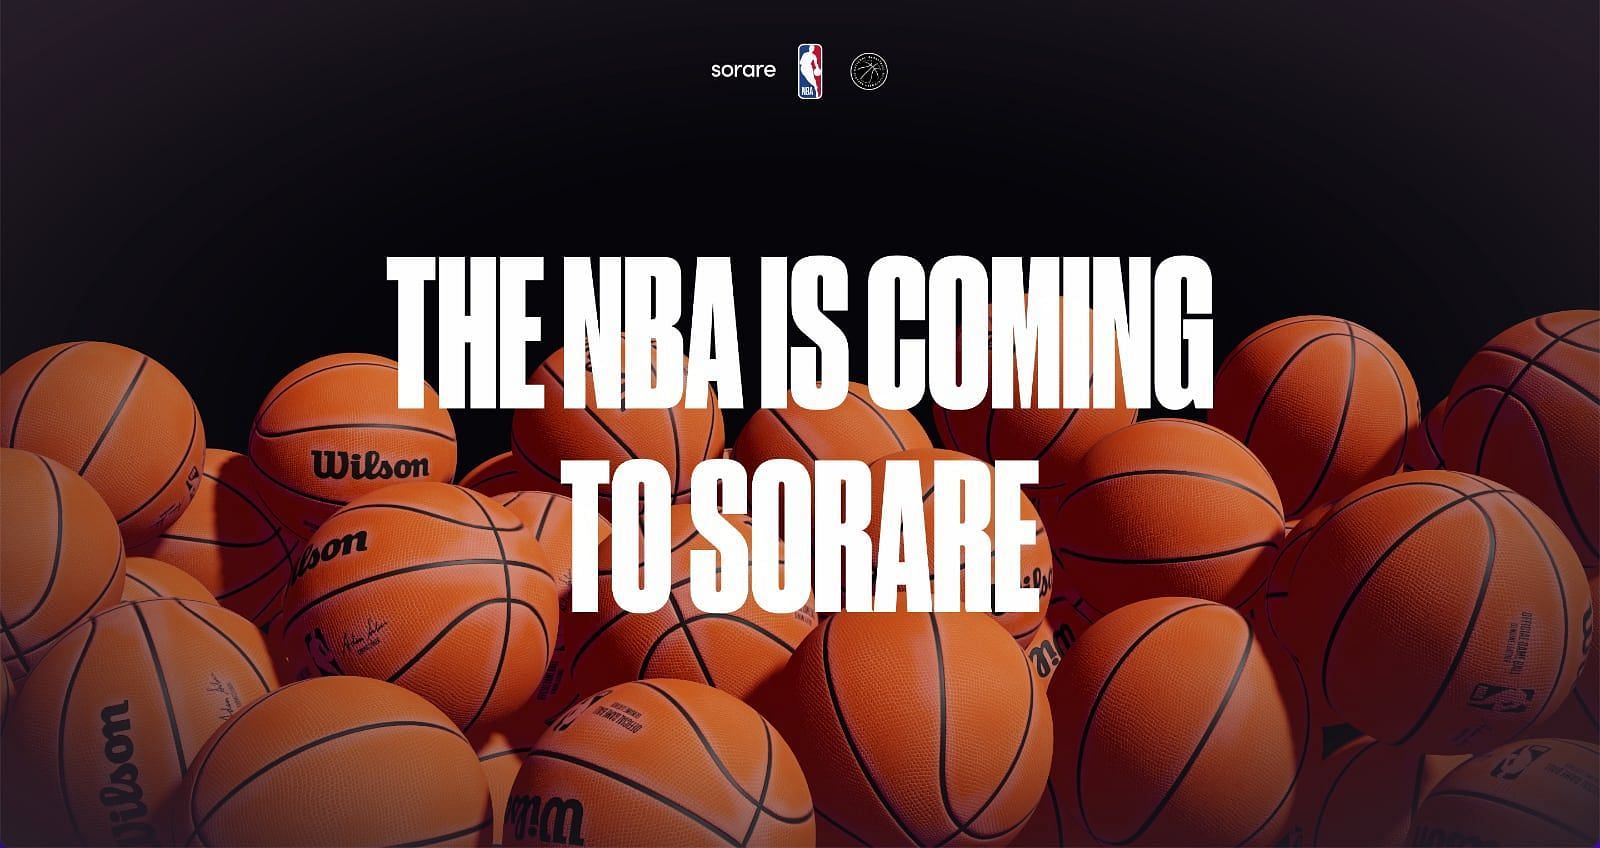 Sorare&#039;s partnership with the NBA resulted in a sports fantasy game (Image Credit: Sorare)